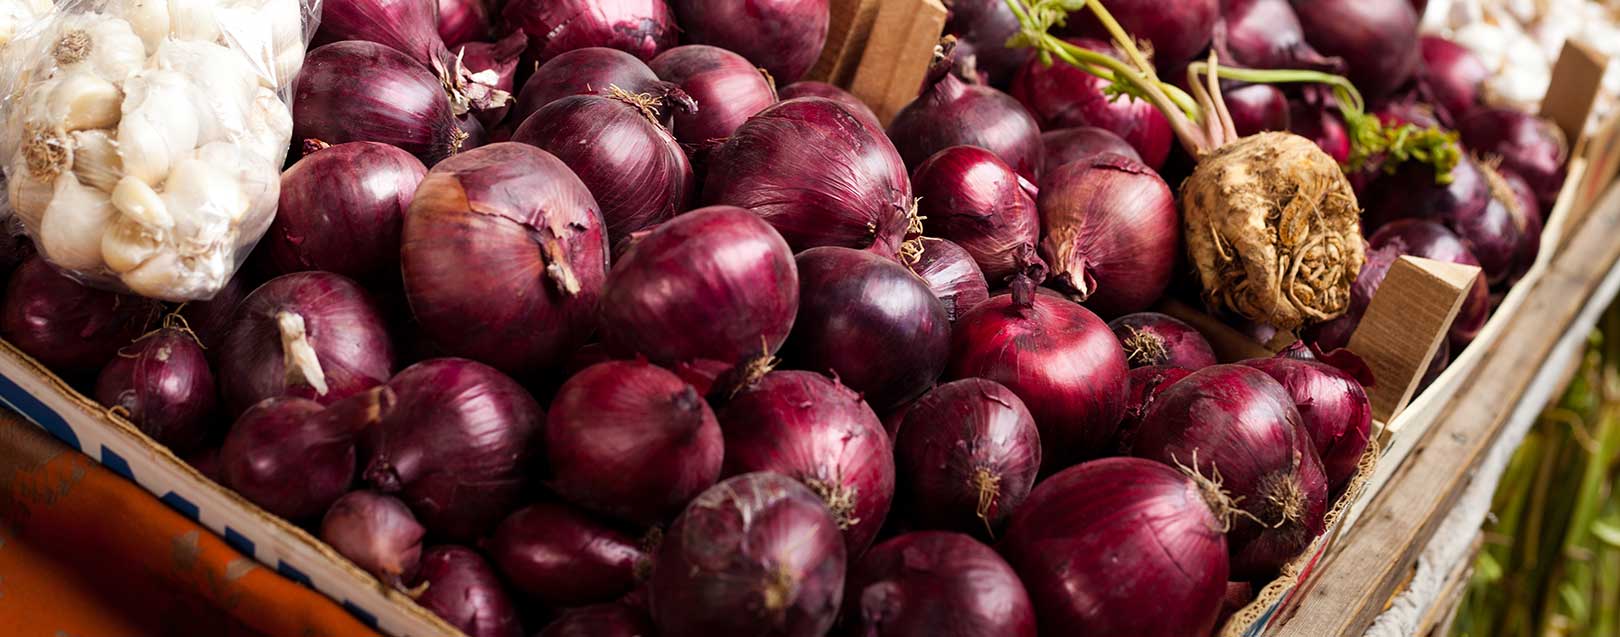 Centre to procure 2 lakh tonne onions from MP